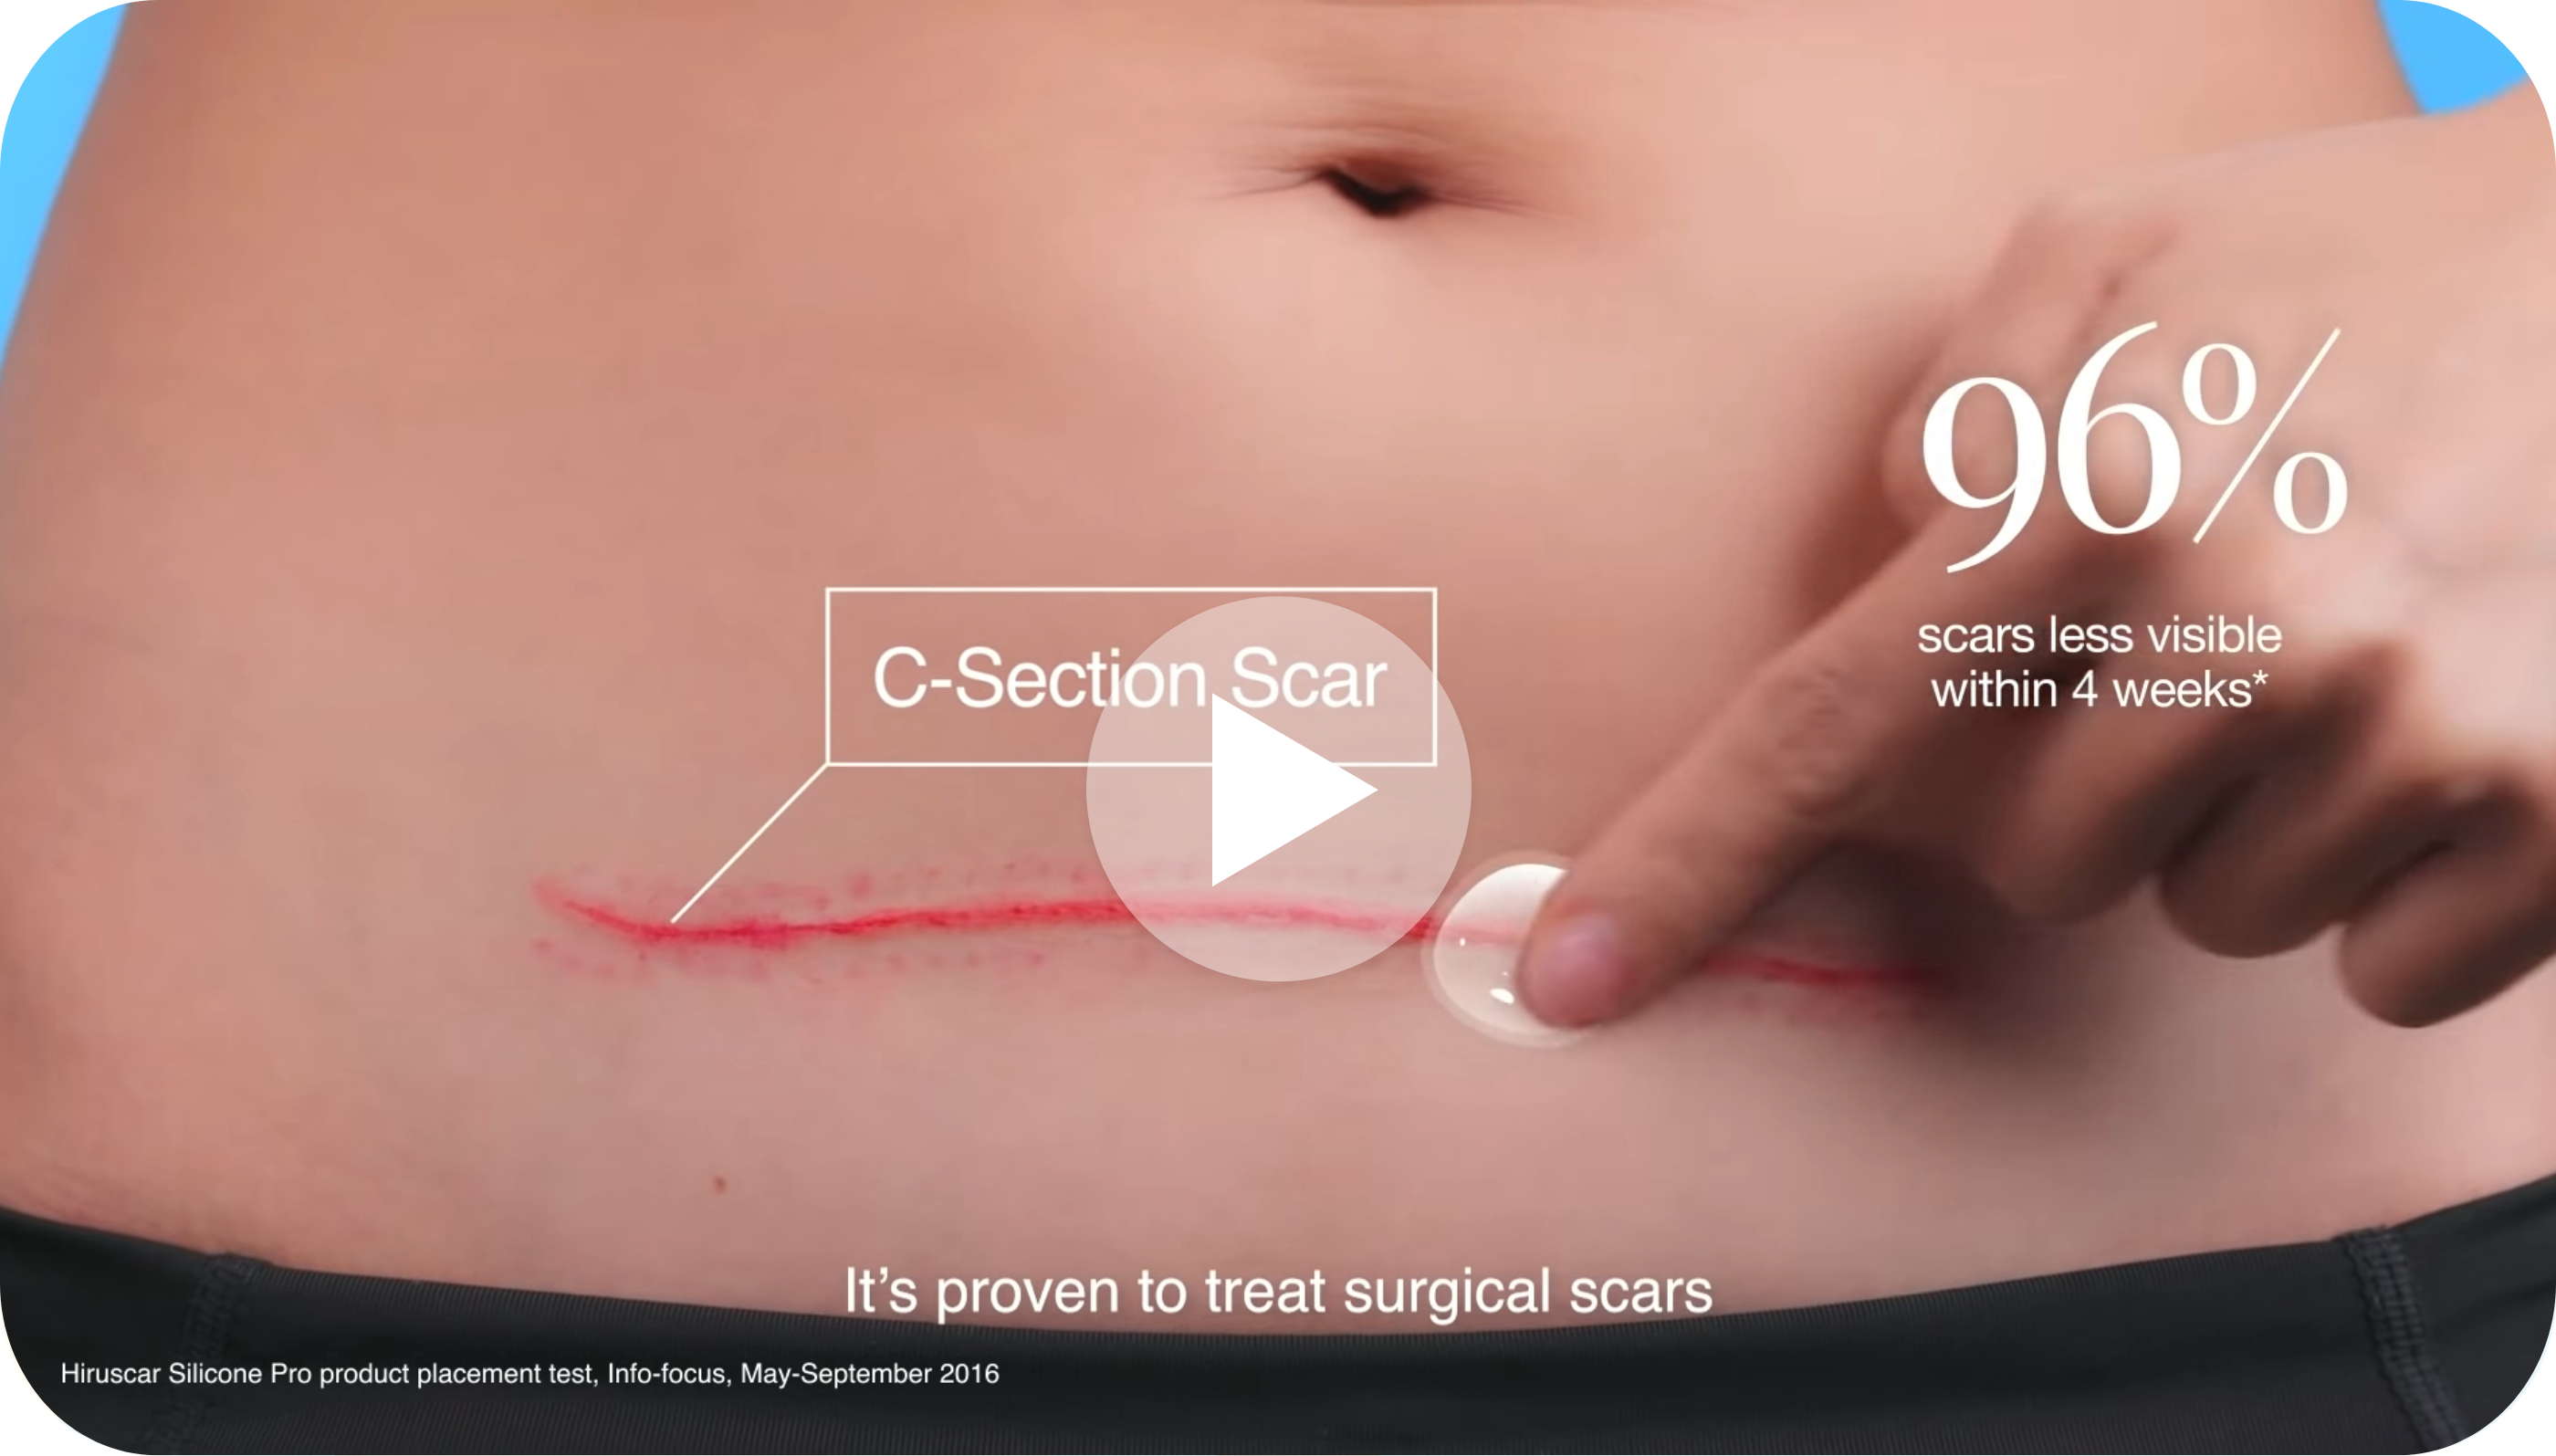 Hiruscar Silicone Pro - Clinically Proven to Treat Surgical Scars